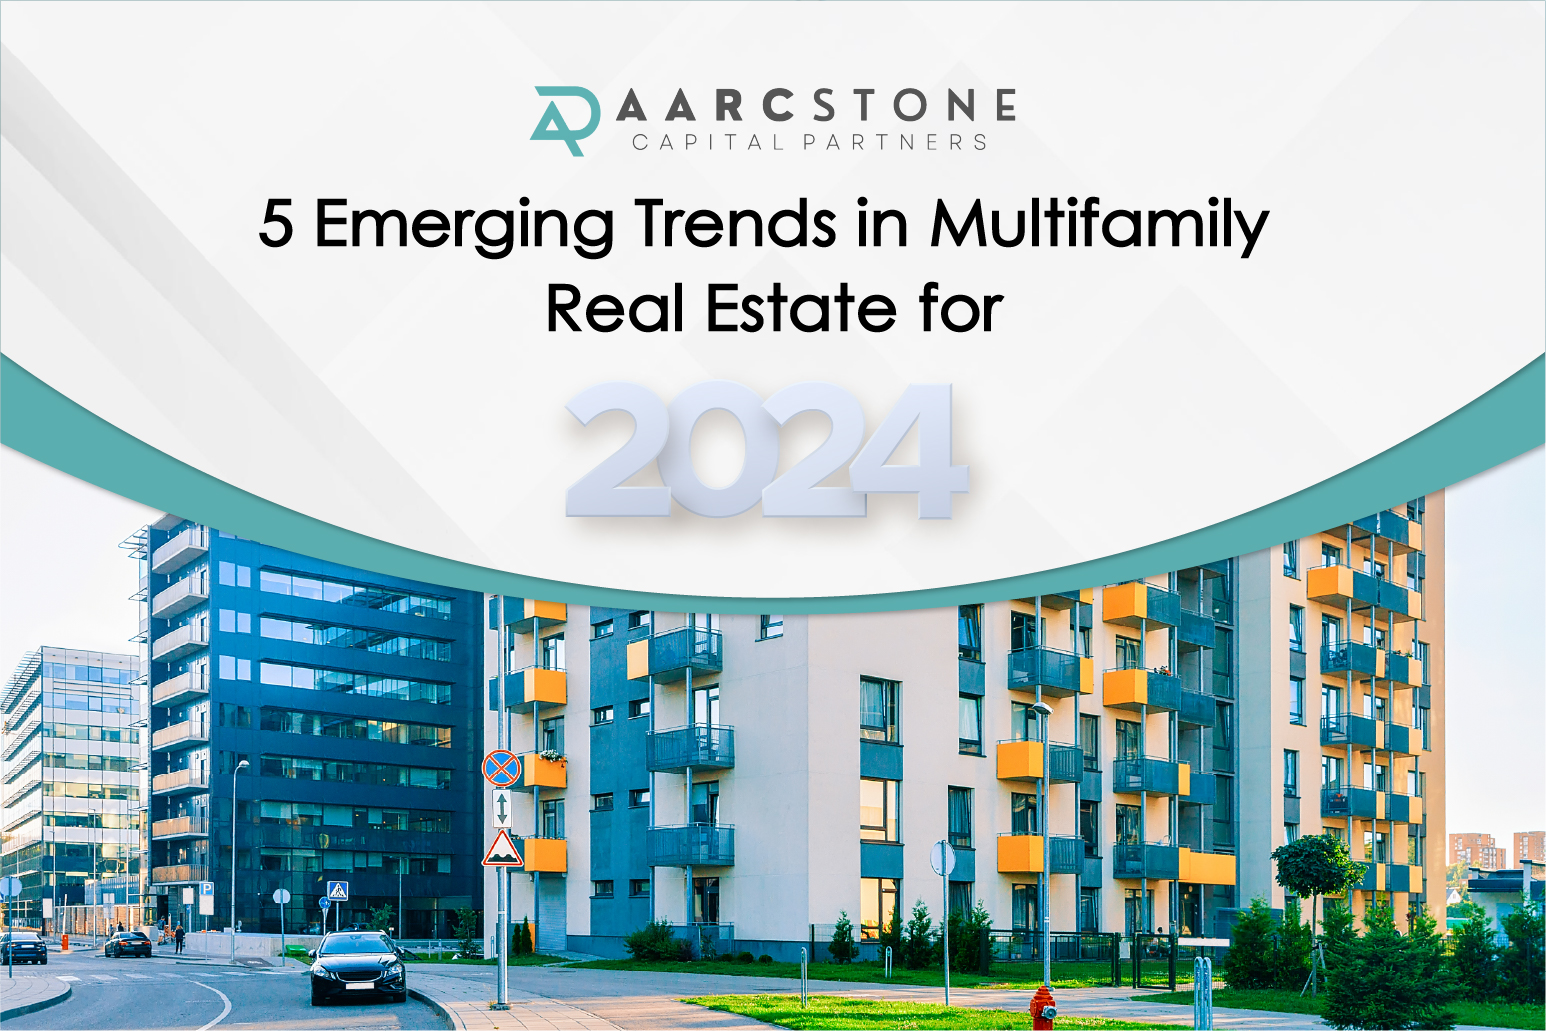 5 Emerging Trends in Multifamily Real Estate for 2024